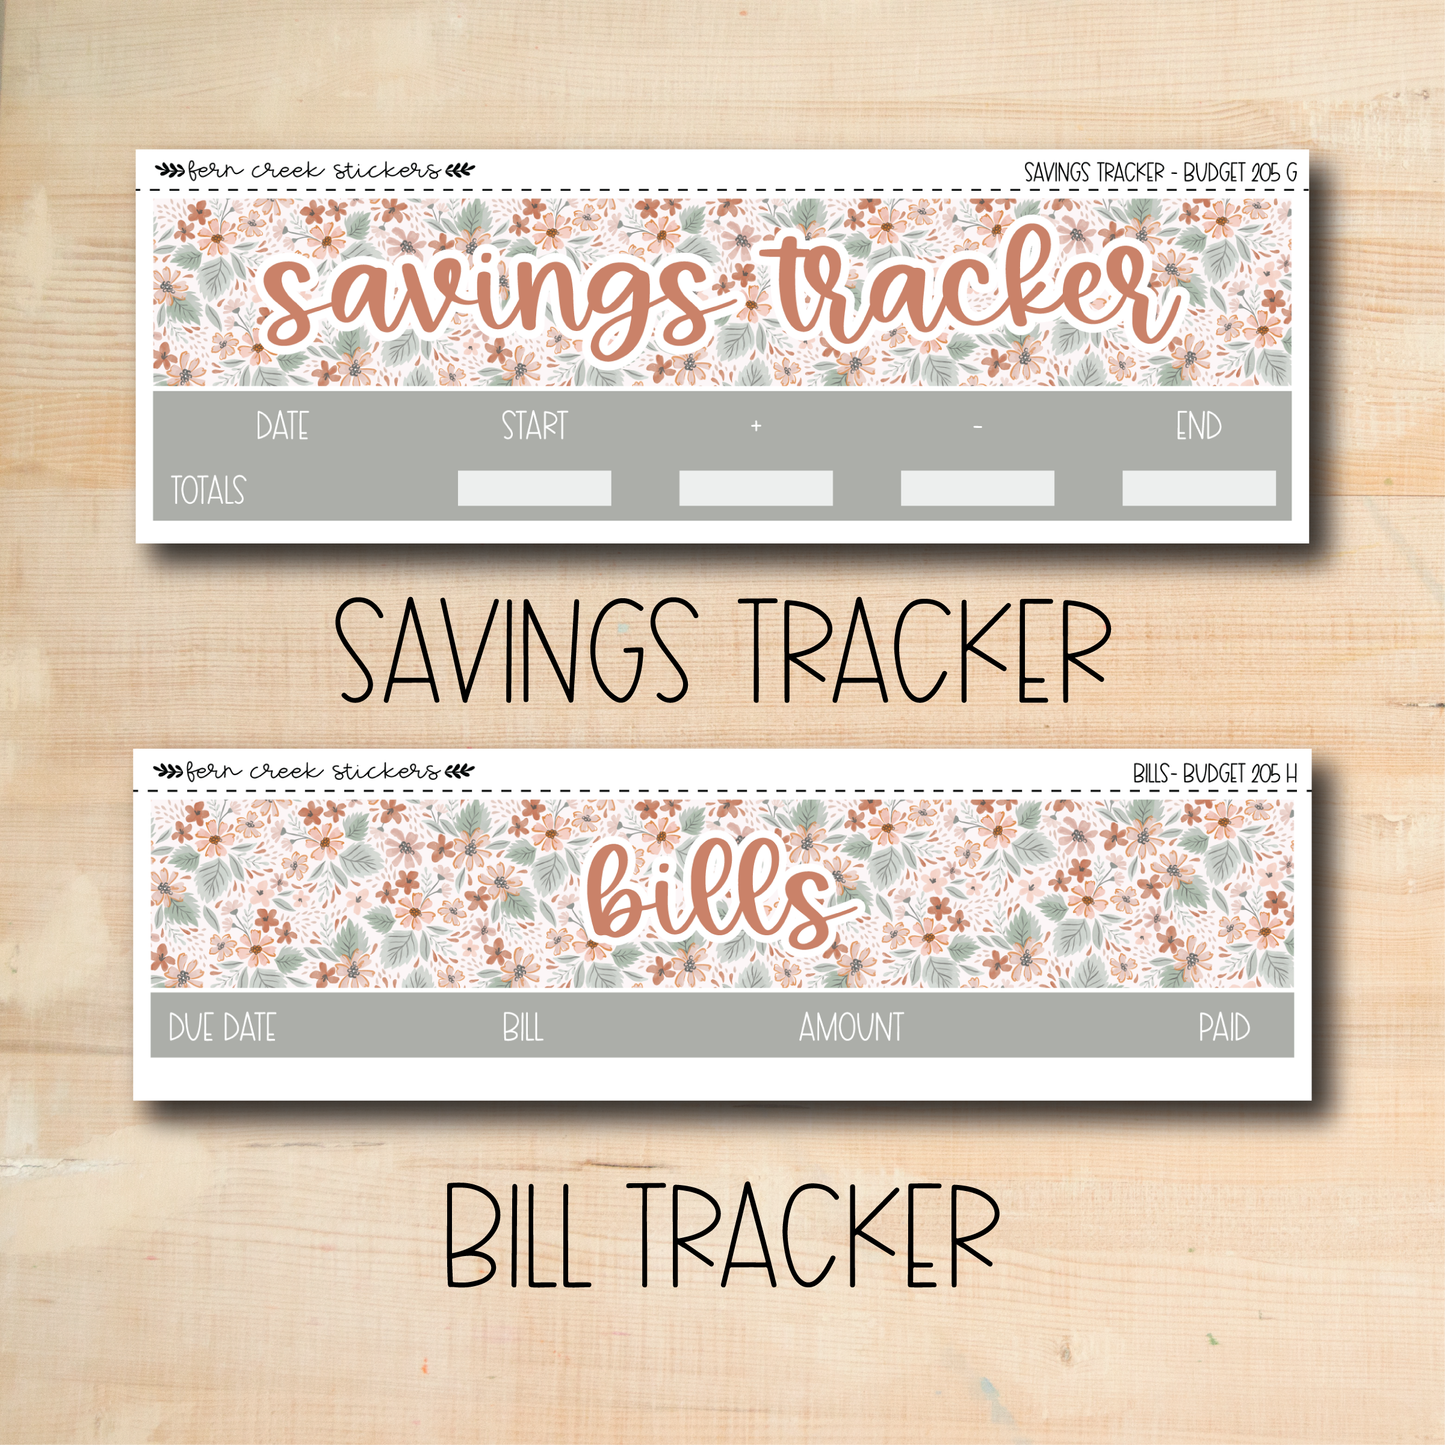 two coupons for savings tracker and bill tracker